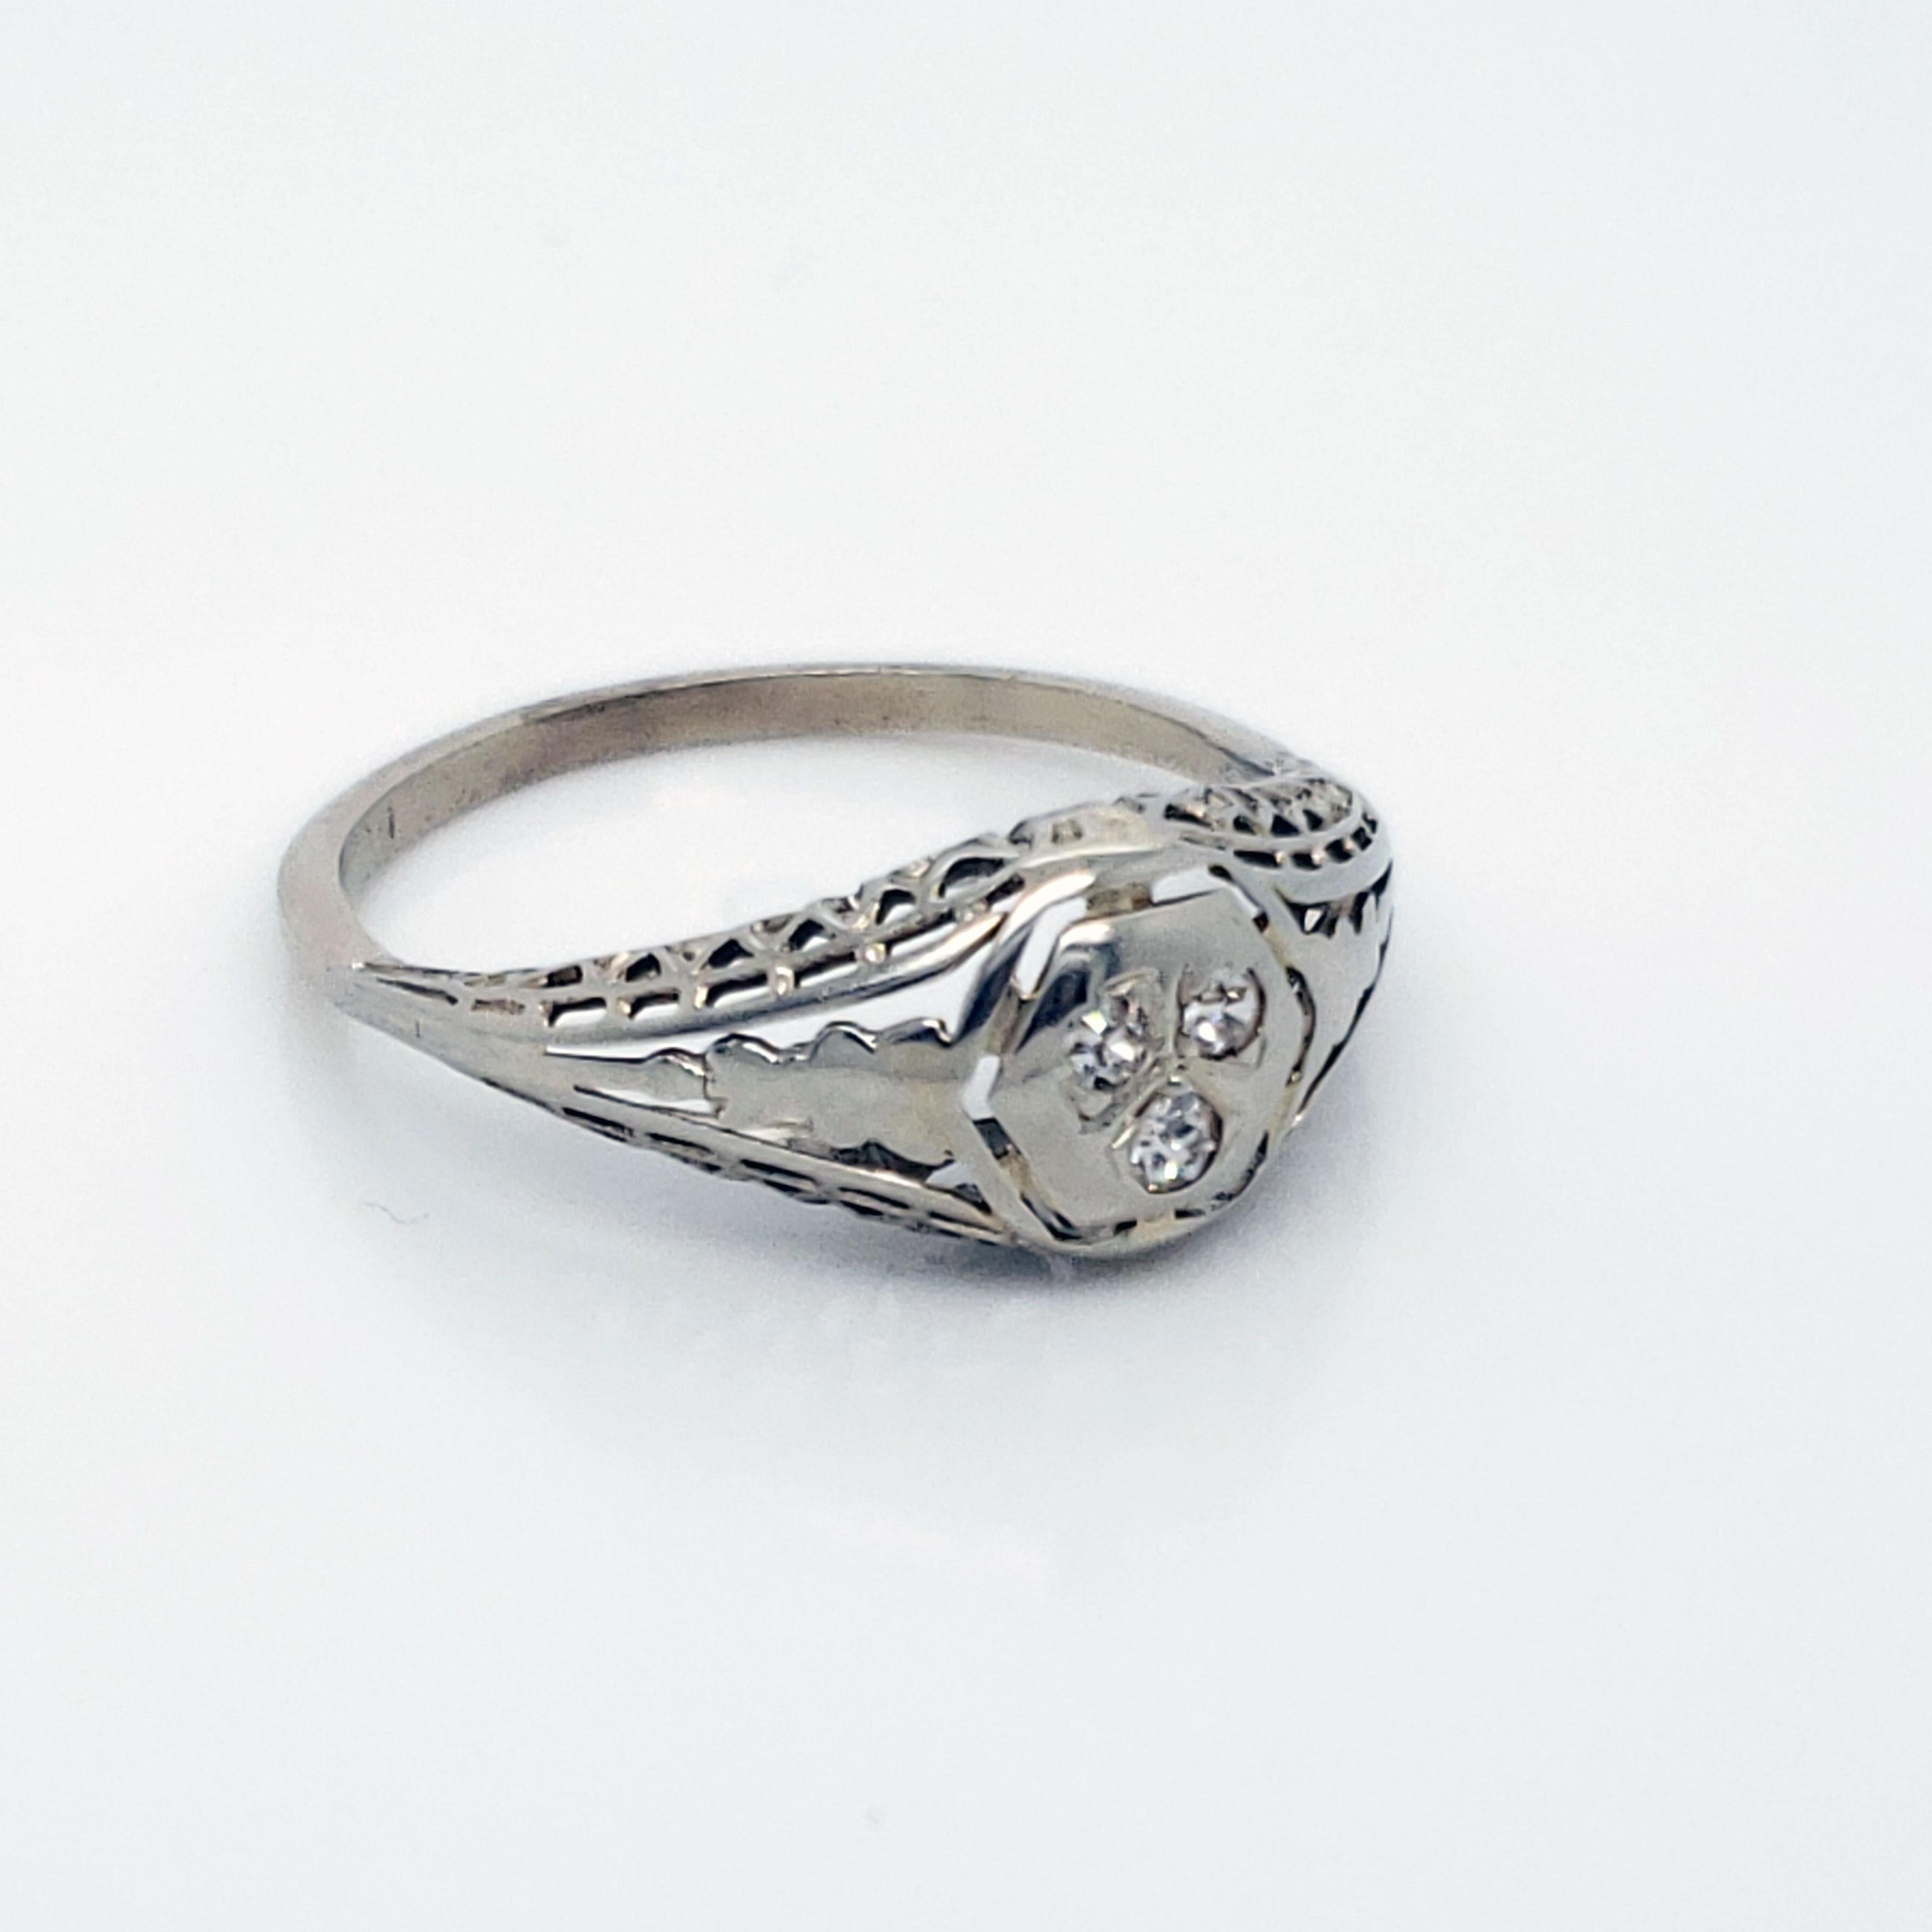 This ring is positively gorgeous! Dated to the 1920s, this lovely ring is fashioned from real 18K white gold and three genuine European Cut diamonds! The filigree detail in this ring will have everyone swooning! The unique look of this lovely